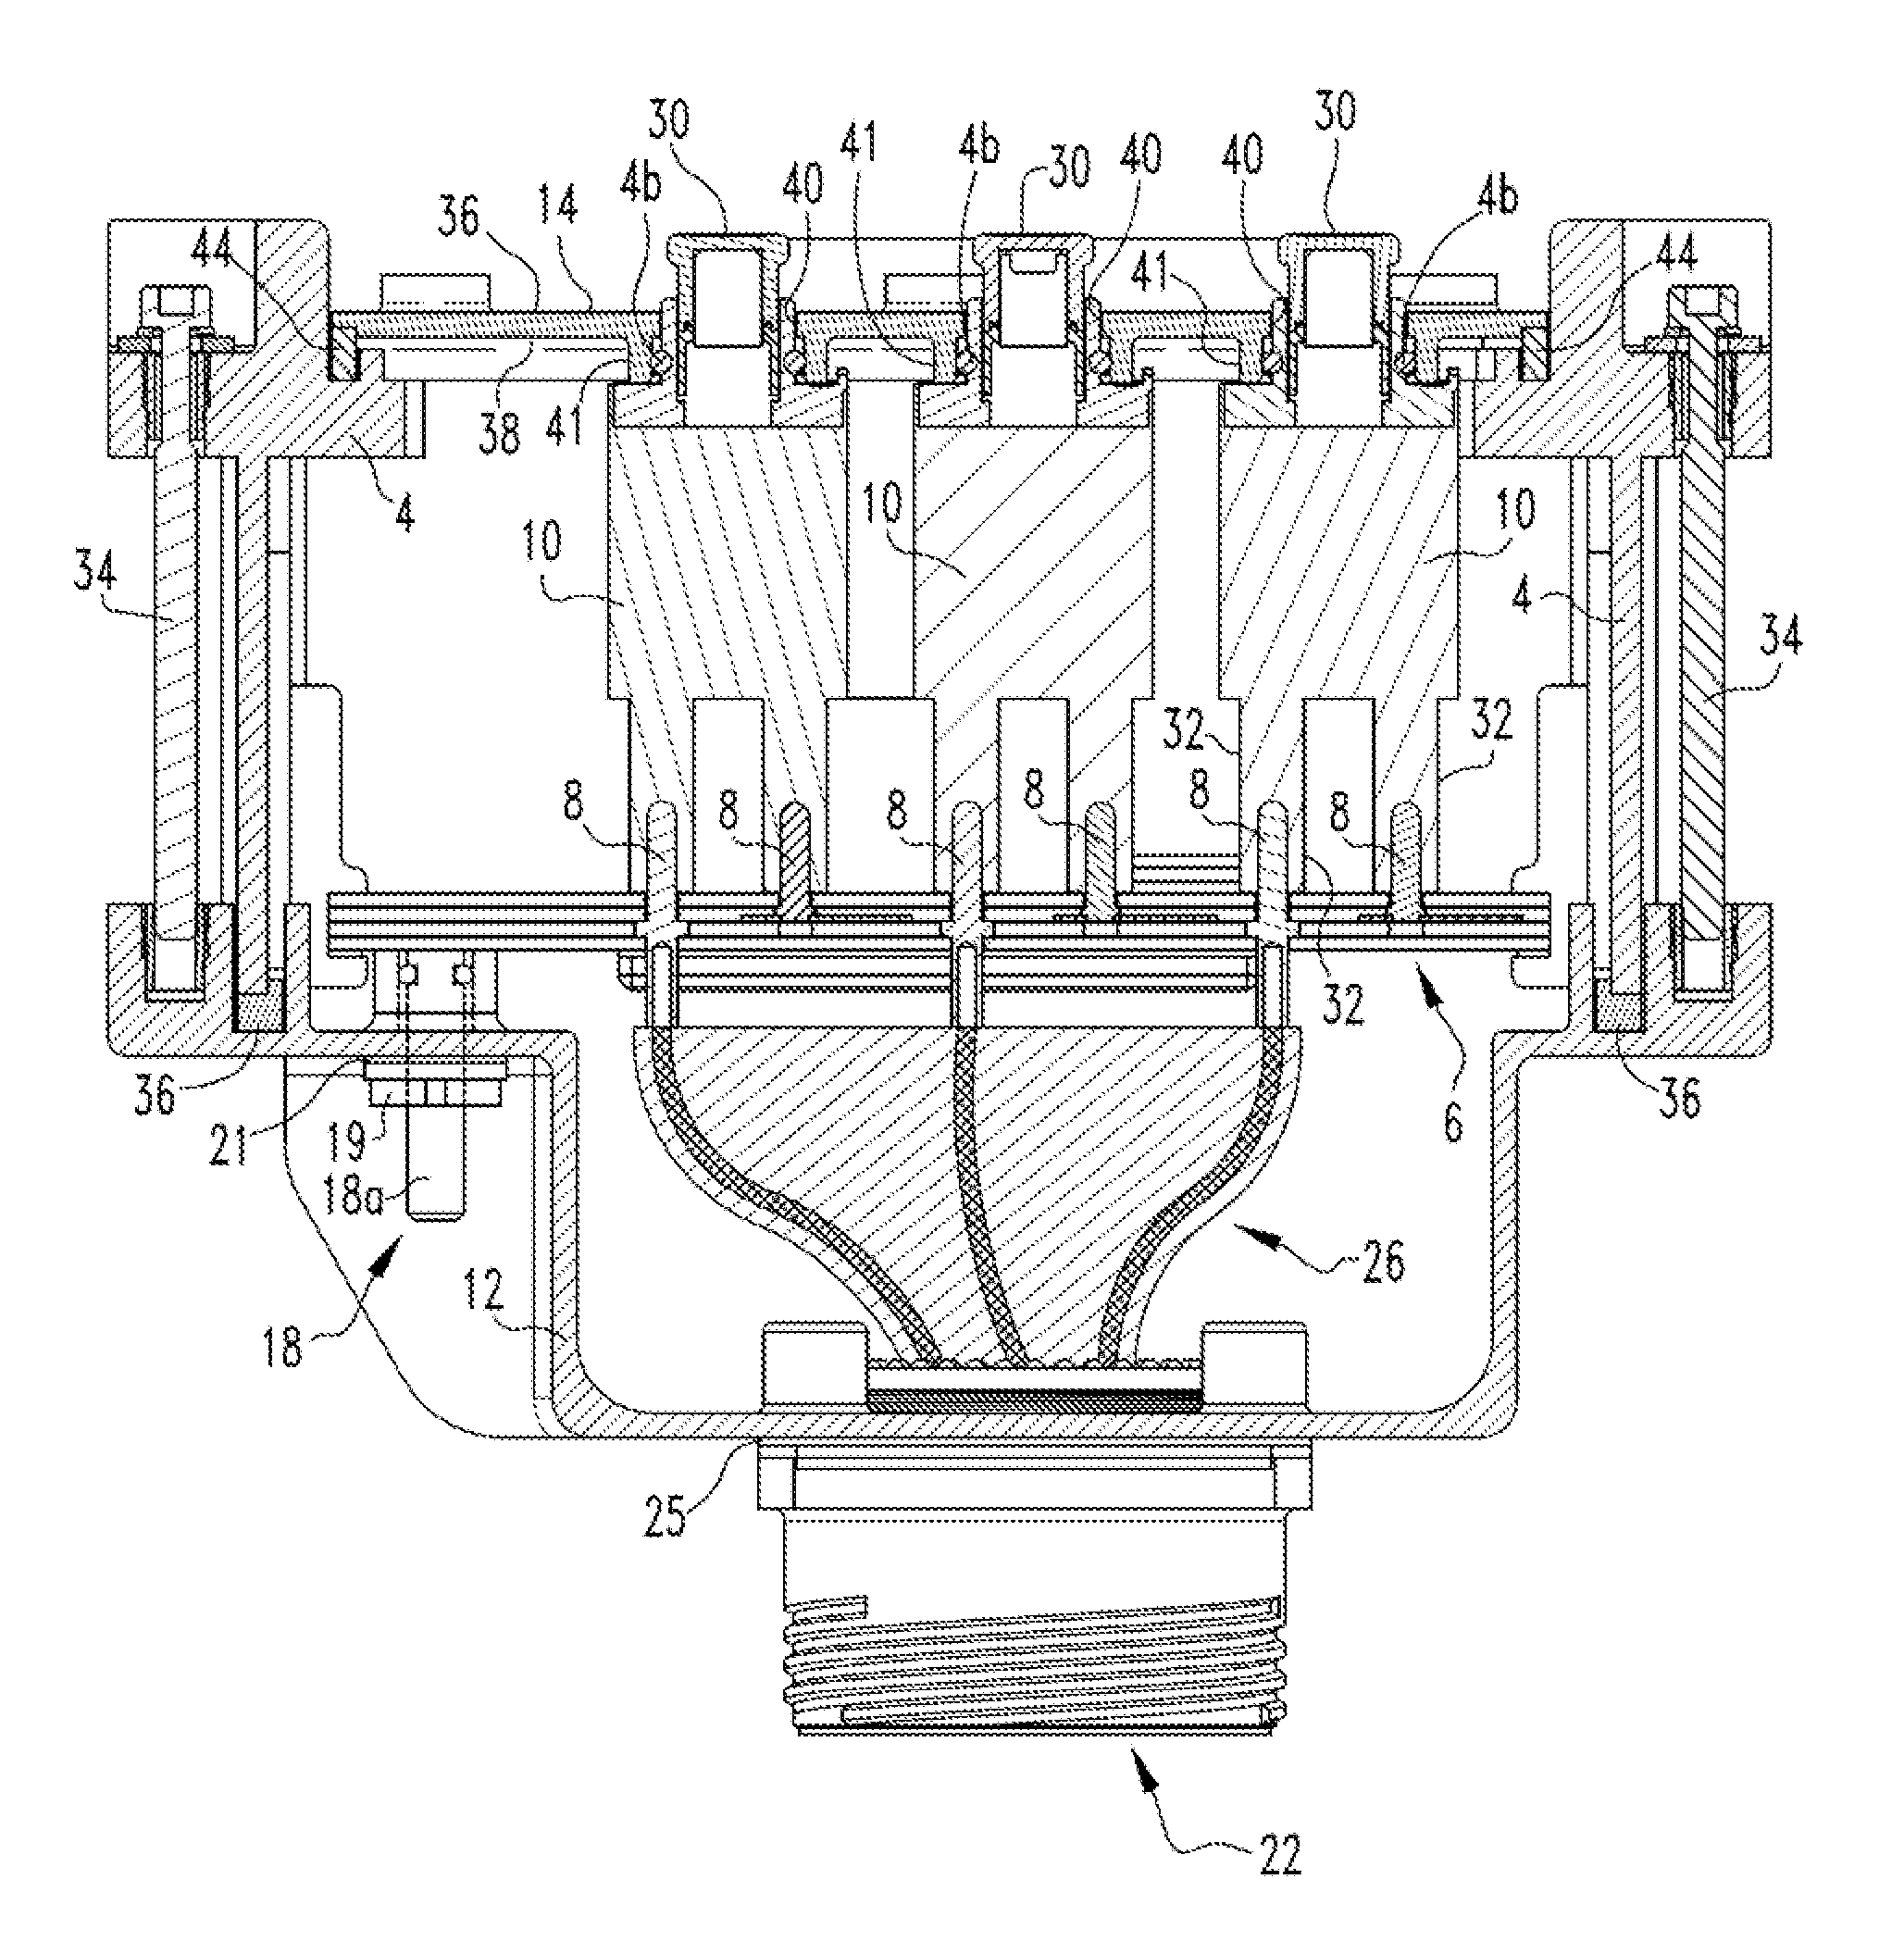 Sealed plug-in circuit breaker assembly